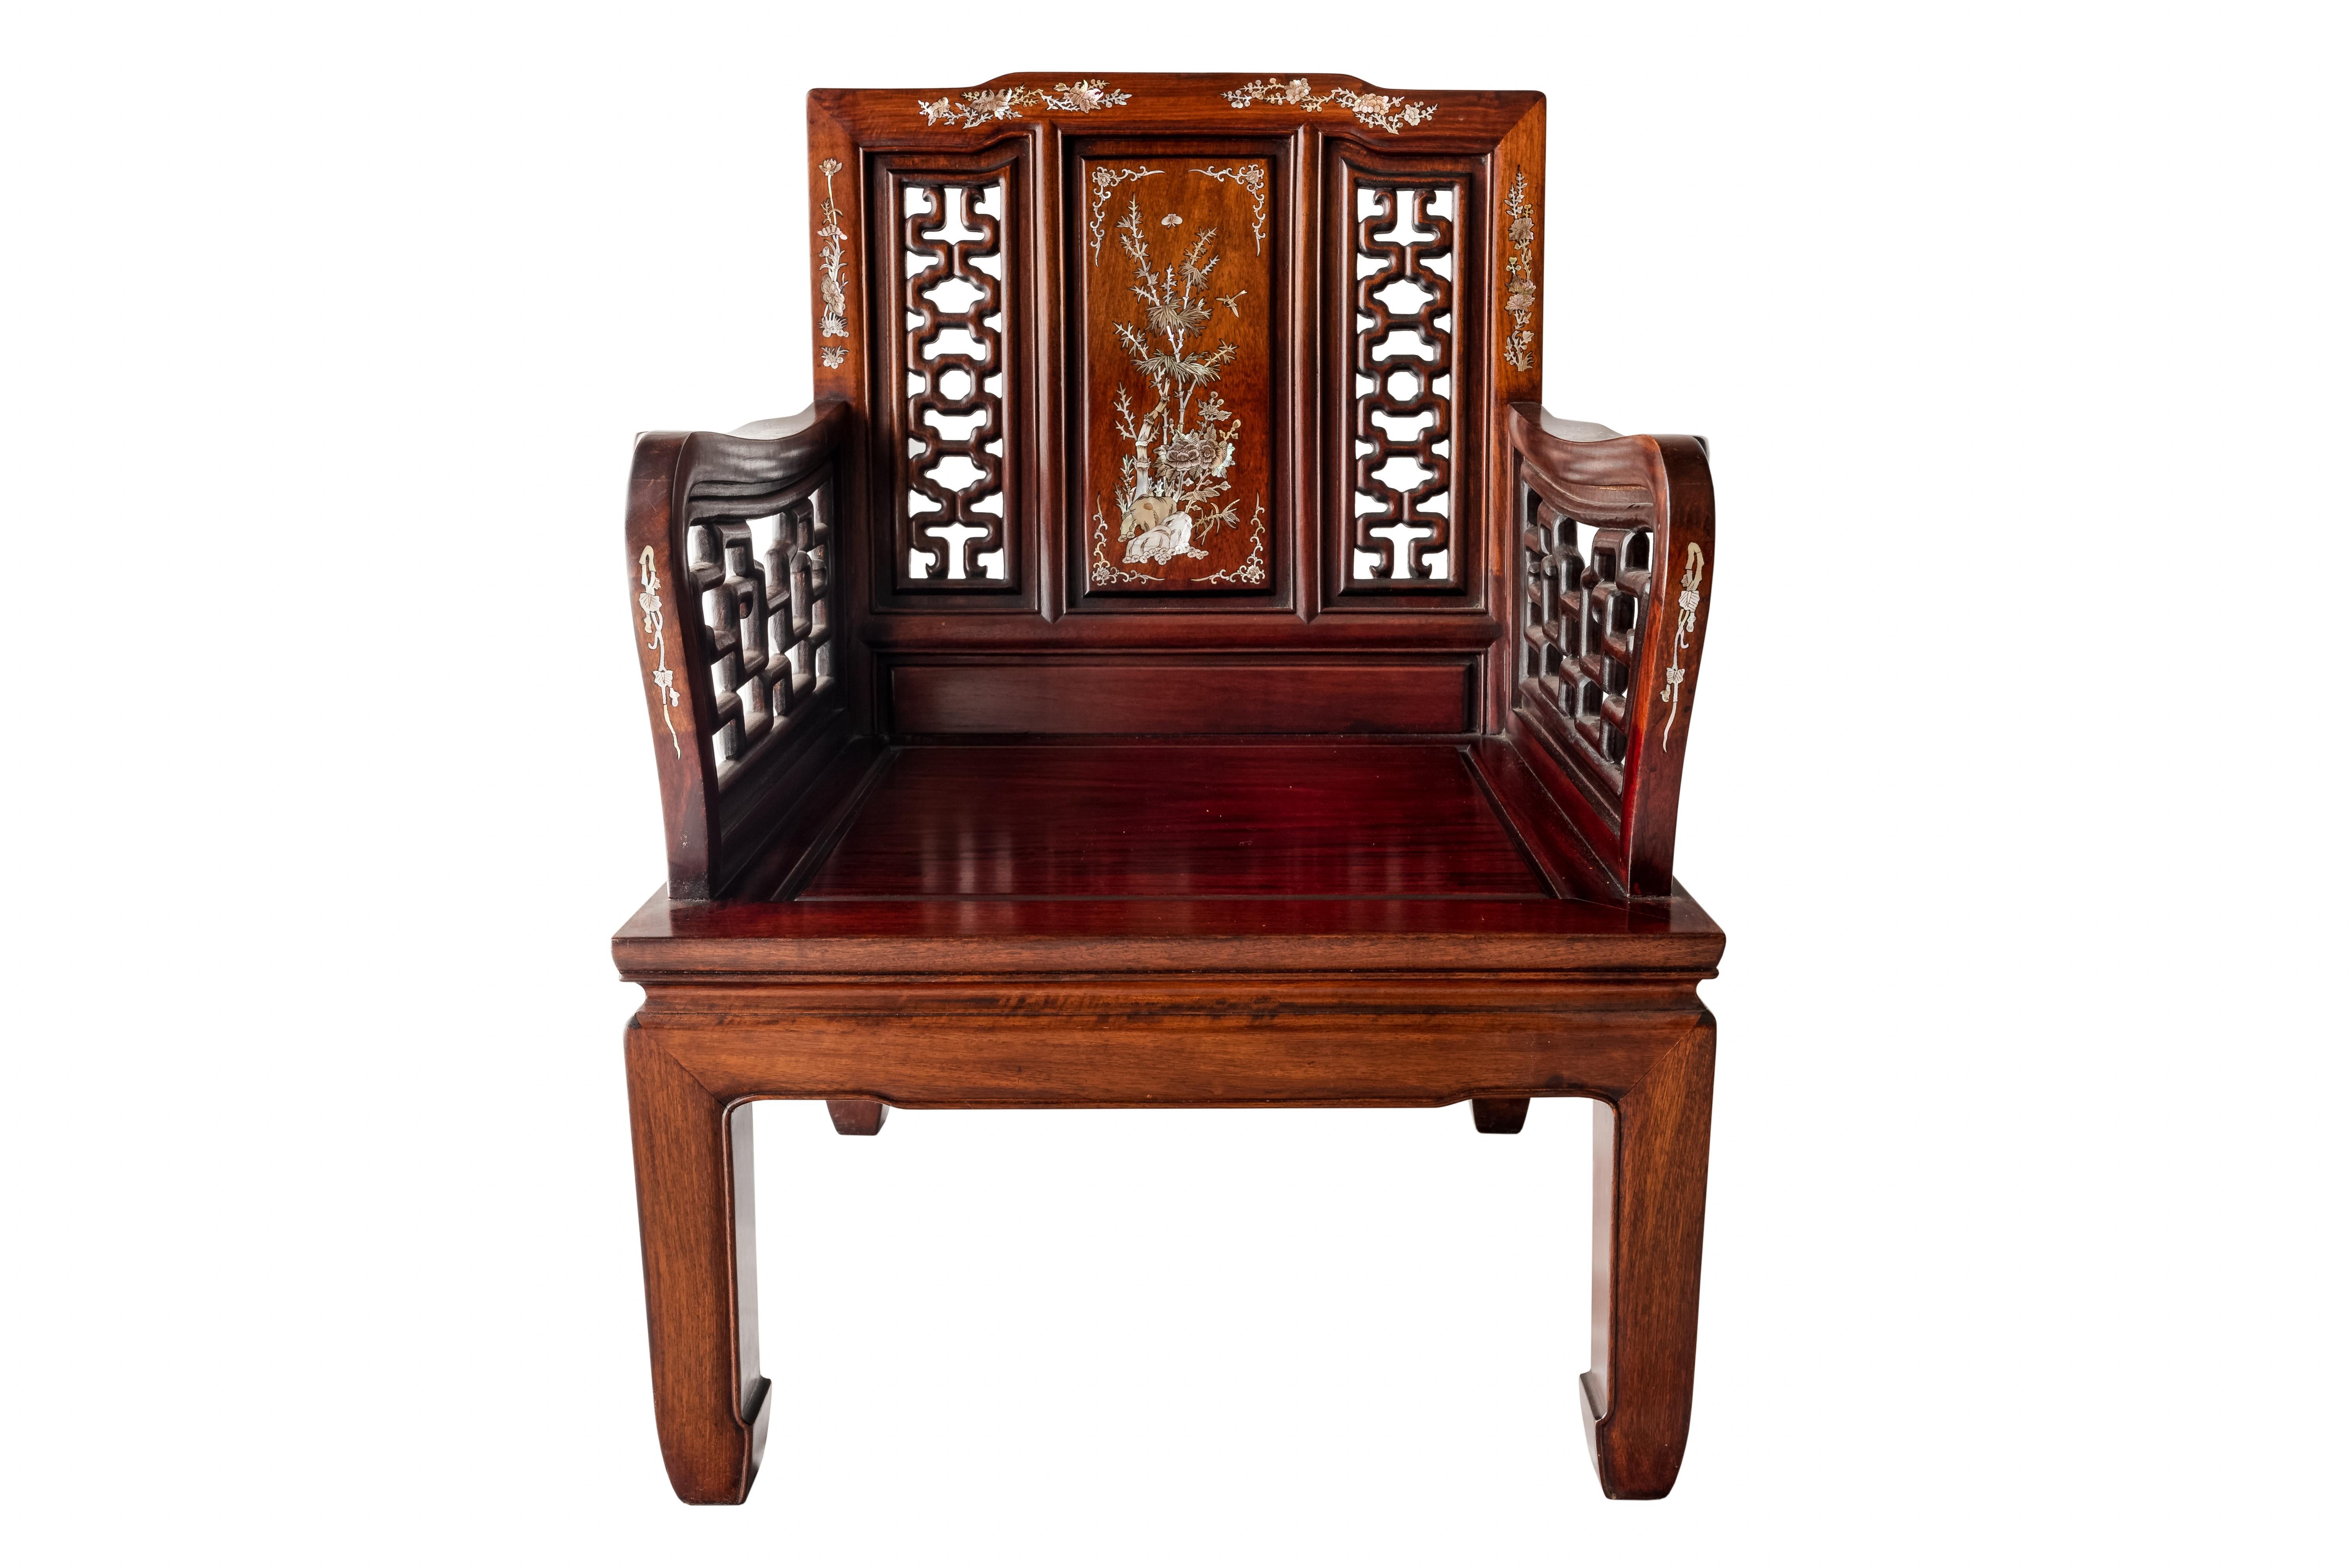 19th century Indo-Portuguese rosewood mother of pearl inlay lounge chairs, 1890

Set of two Indo-Portuguese rosewood and mother of pearl club chairs. Each chair is inlaid with intricate mother of pearl designs on the yoke, the back splat, the seat